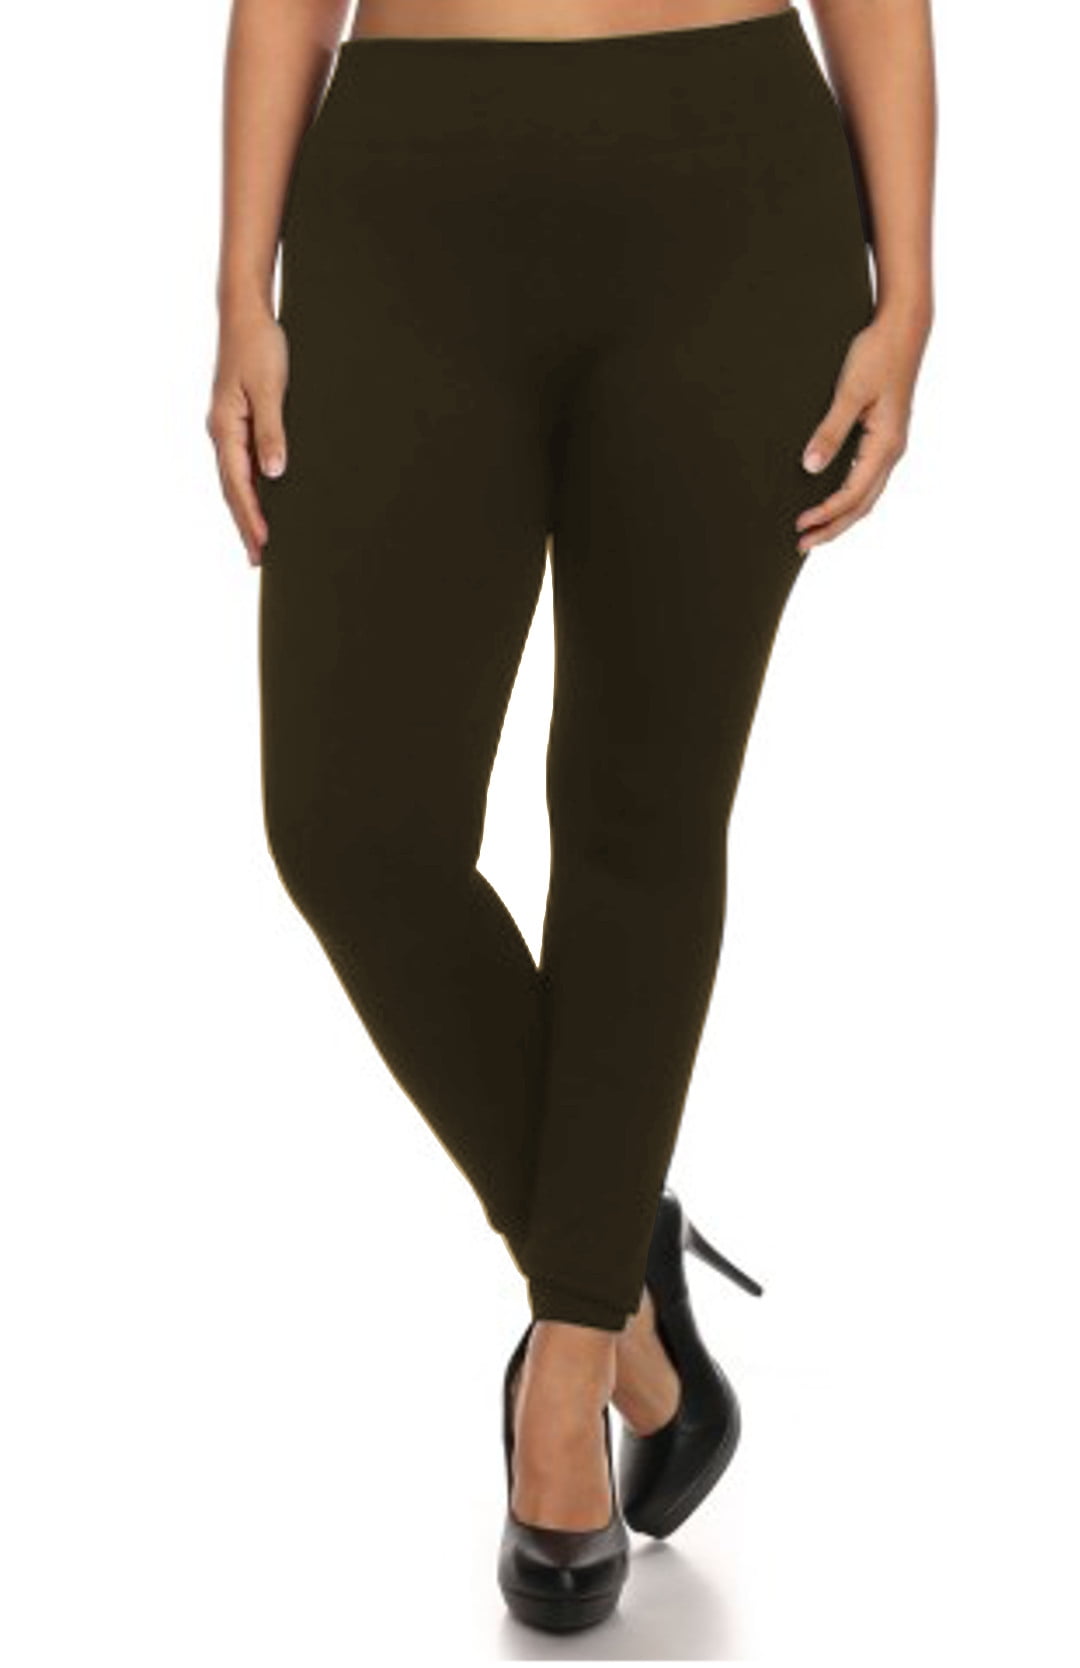 Women's High-waisted Classic Leggings - Wild Fable™ Deep Olive 2x